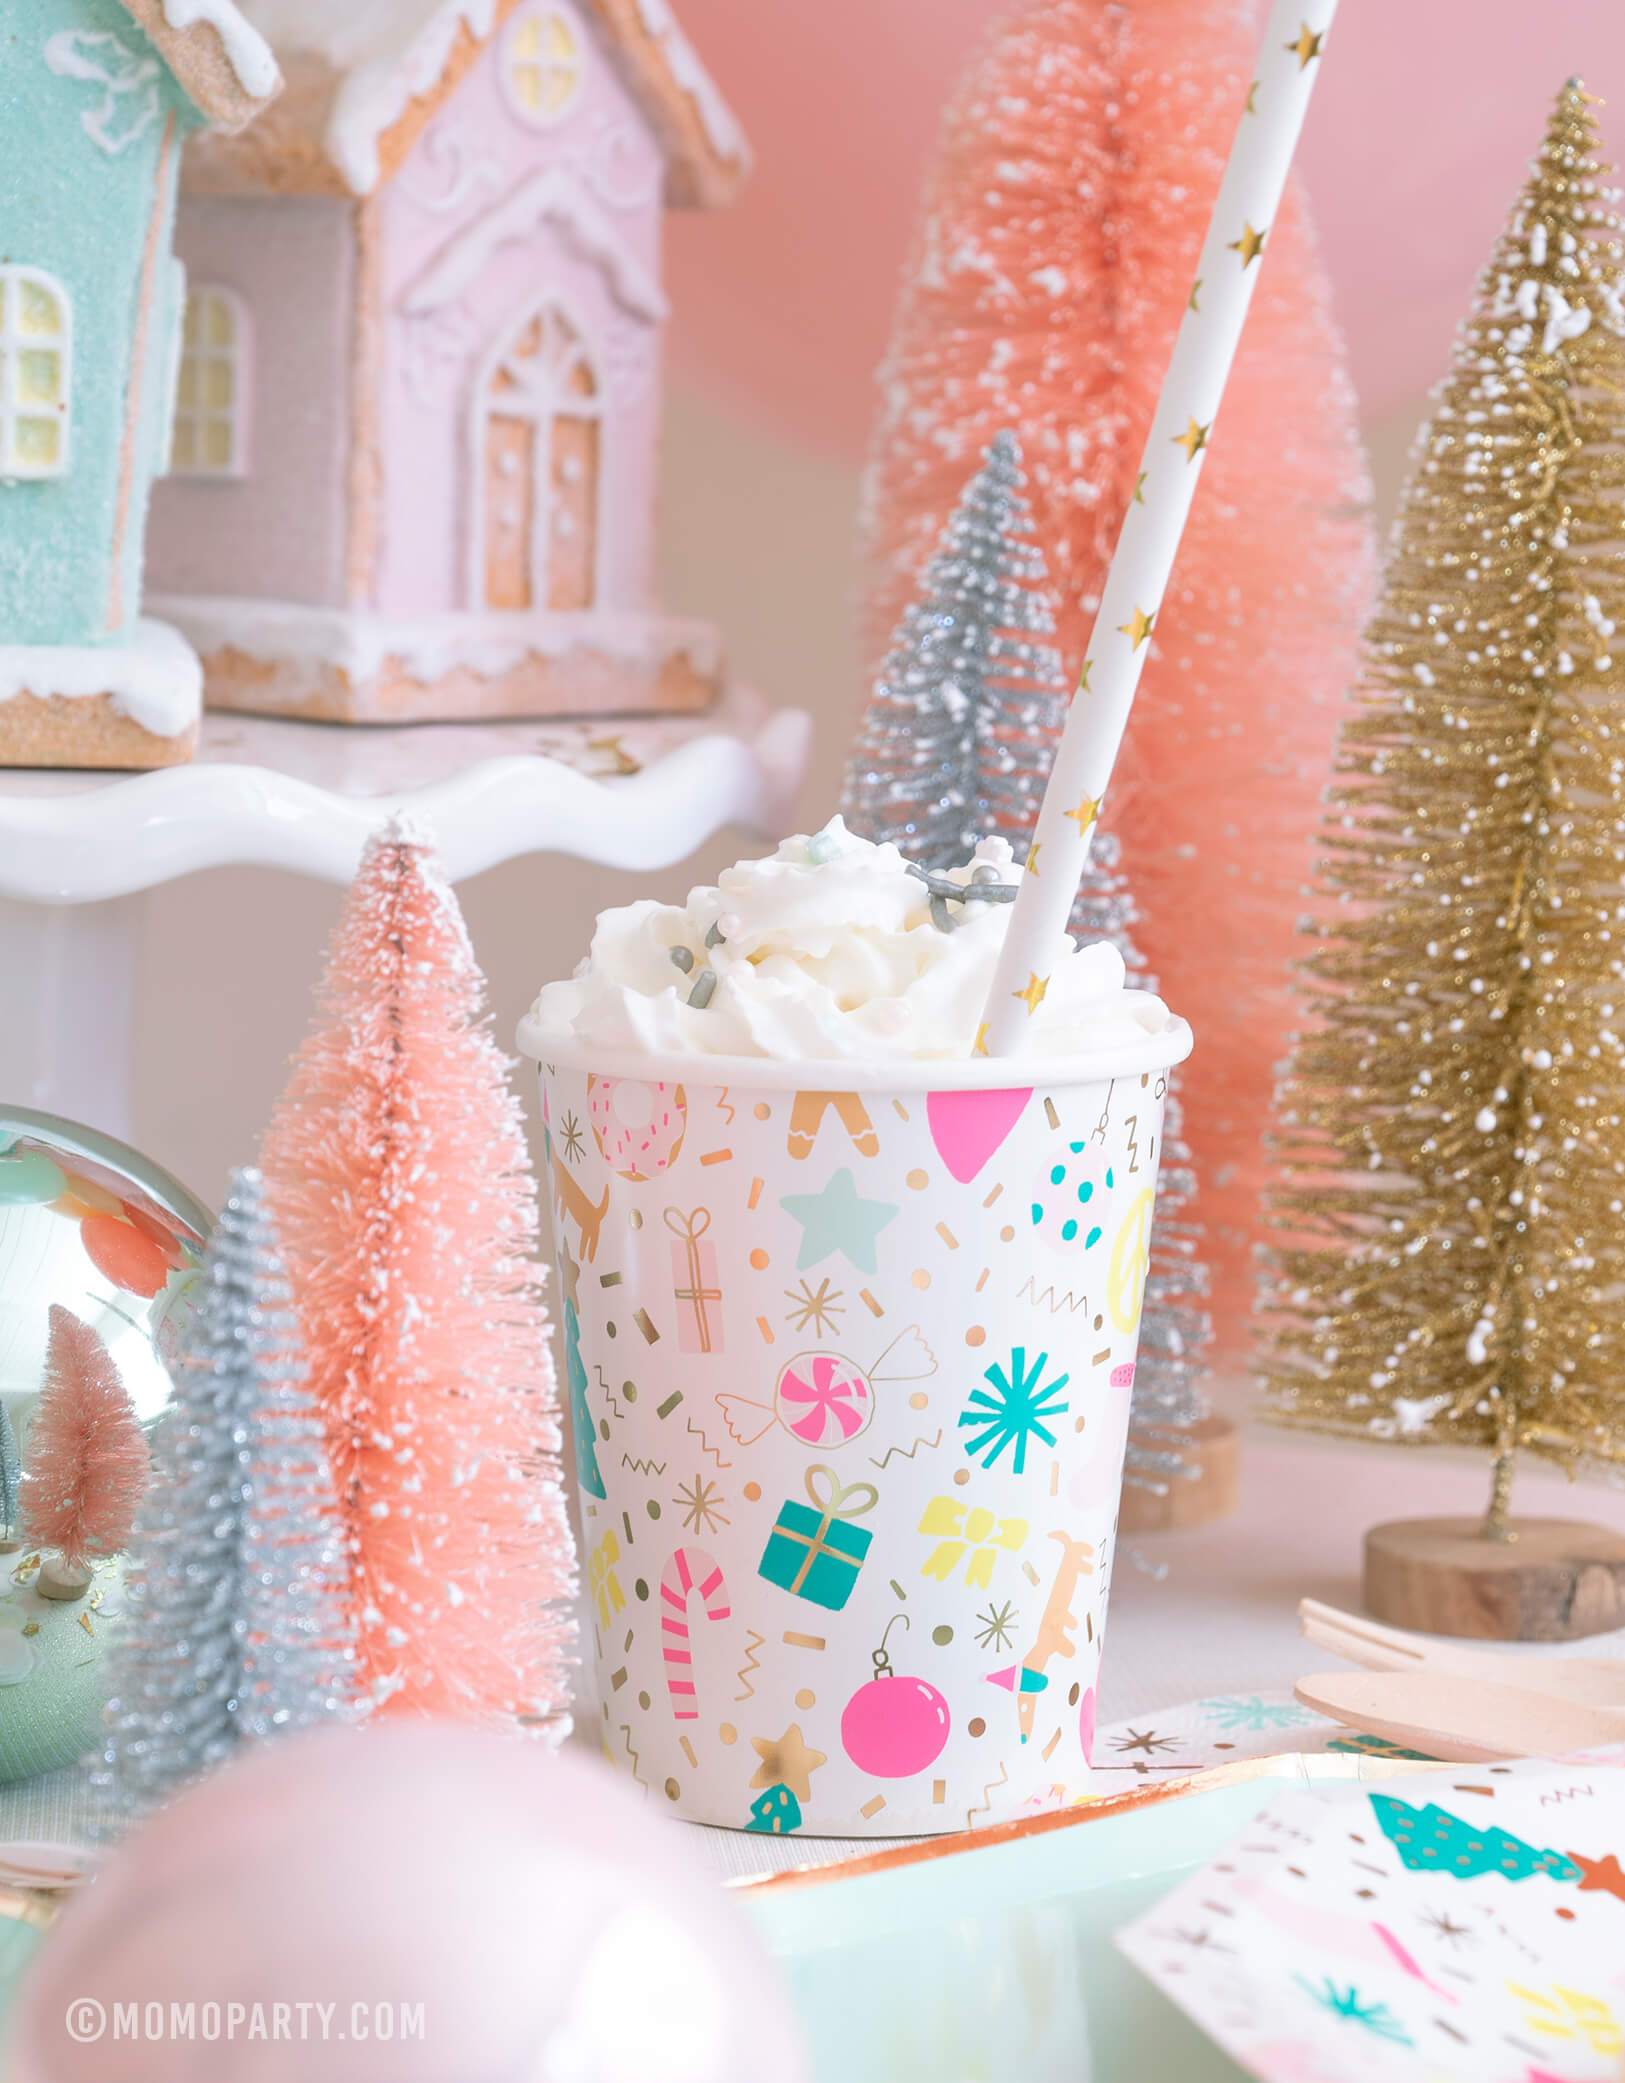 Daydream Society Merry and Bright Holiday Christmas Party Cups with Wrap cream and Golden Star paper party straw, Sisal Trees, ginger bread house decorations for holiday celebration  